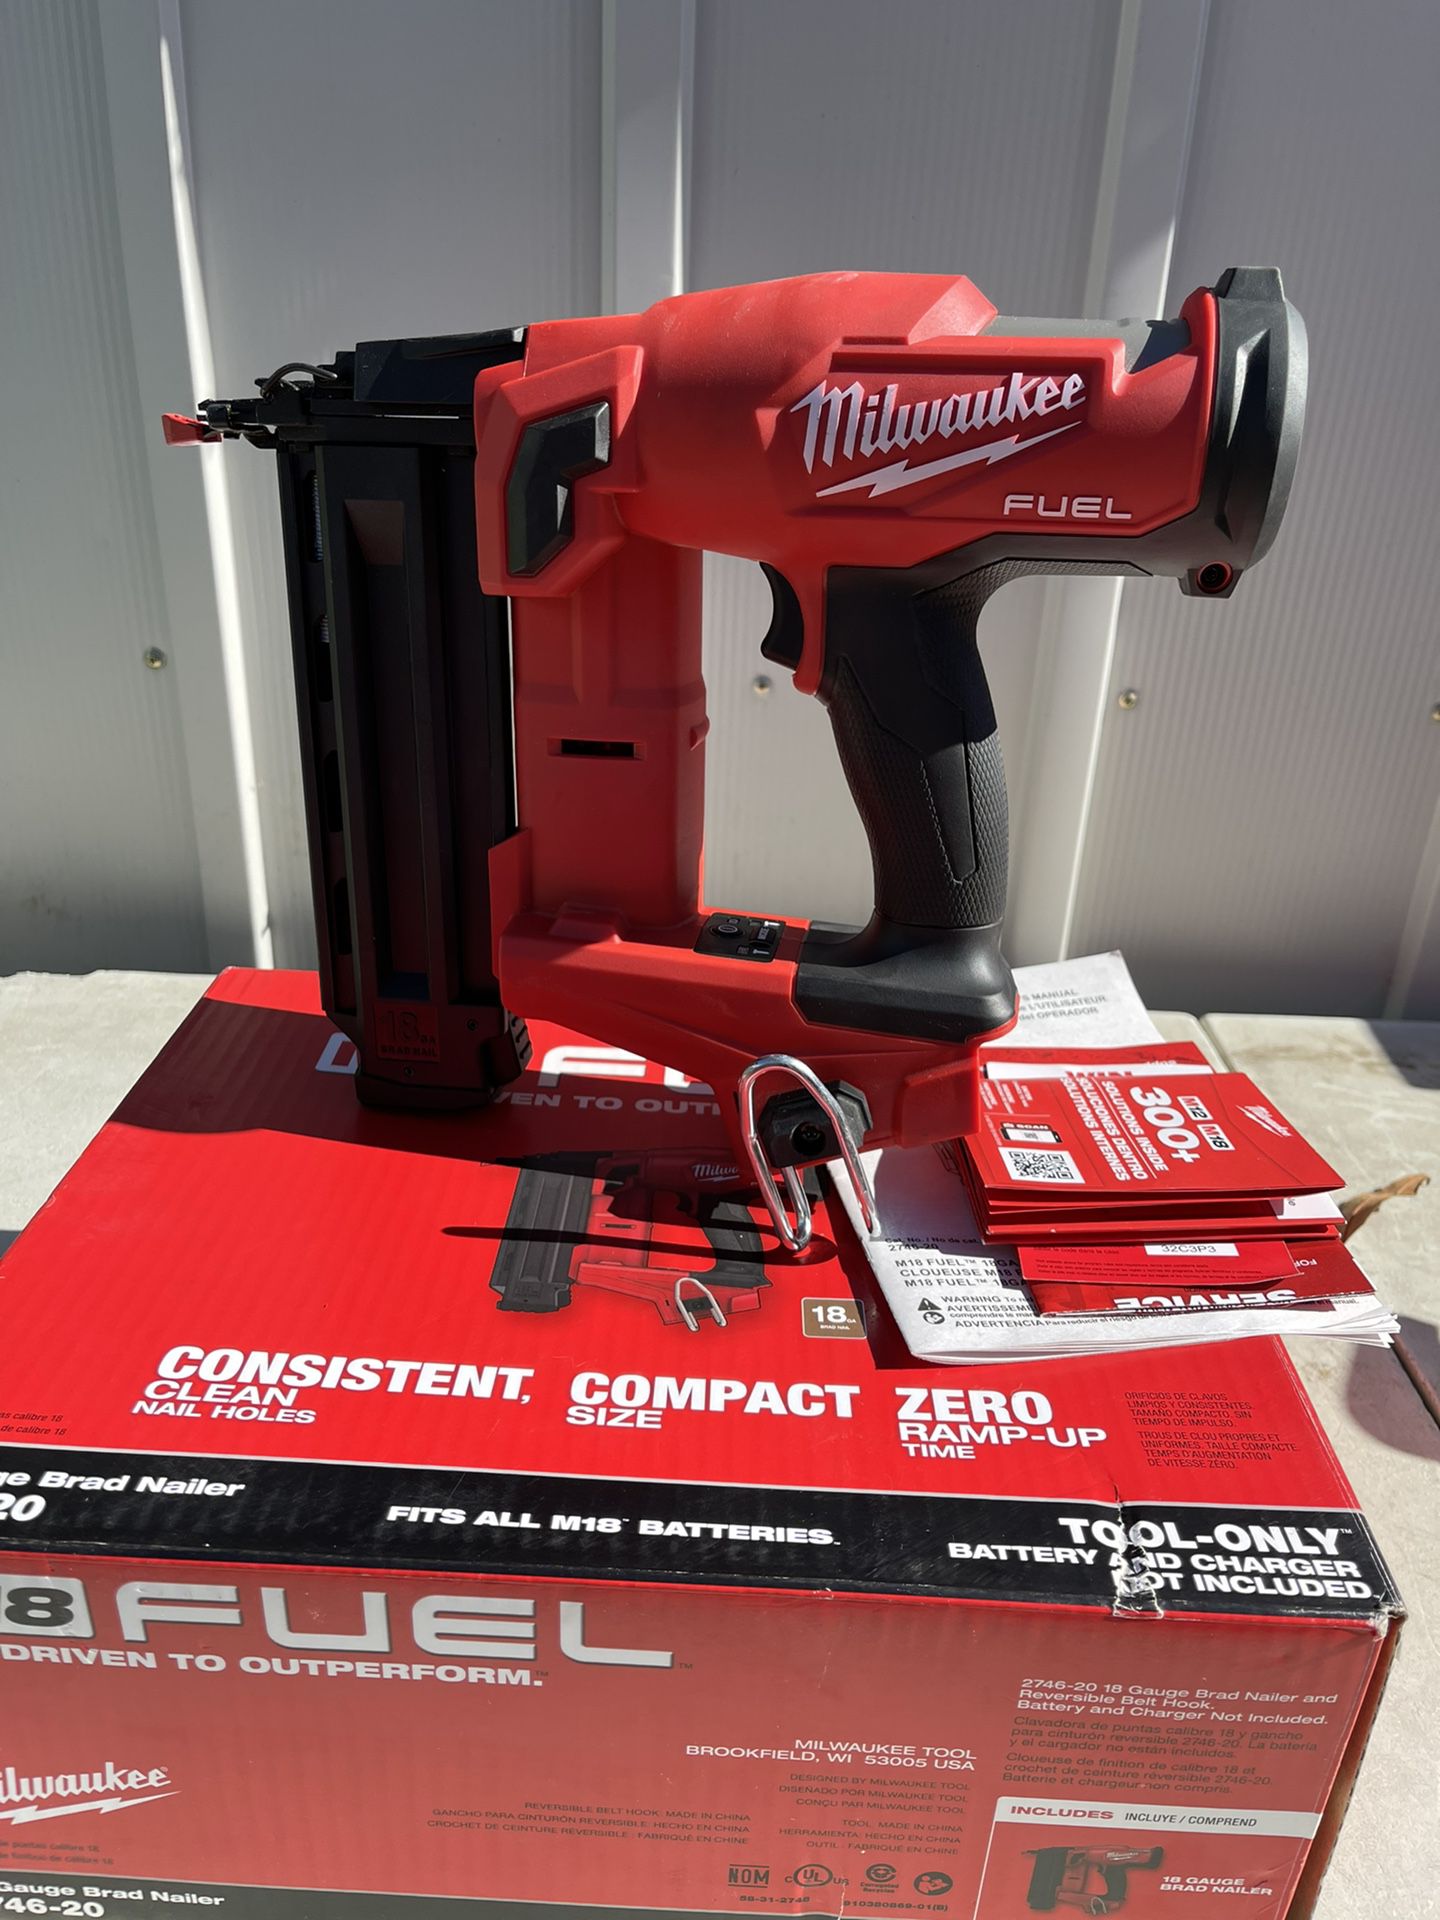 Milwaukee M18 FUEL 18-Volt Lithium-Ion Brushless Cordless Gen II 18-Gauge  Brad Nailer (Tool-Only) for Sale in La Habra Heights, CA OfferUp